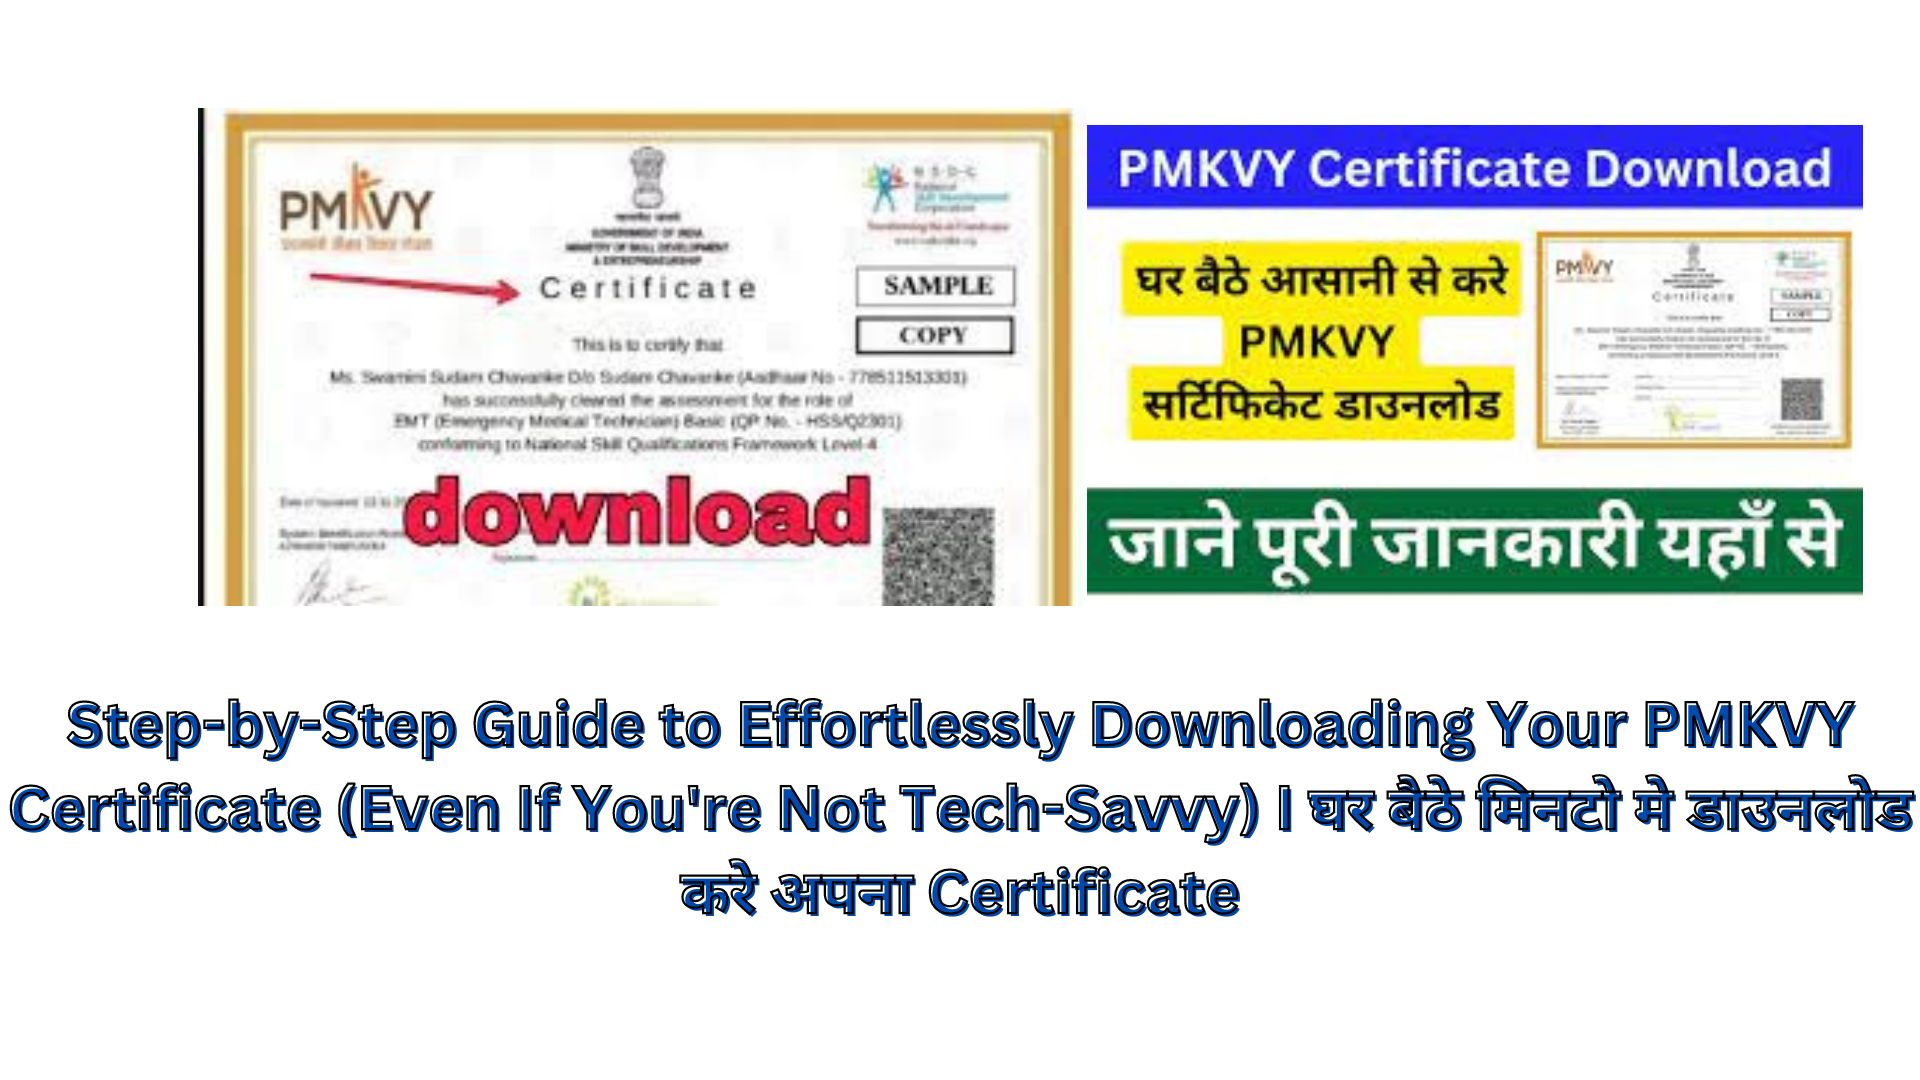 Step-by-Step Guide to Effortlessly Downloading Your PMKVY Certificate (Even If You're Not Tech-Savvy) I घर बैठे मिनटो मे डाउनलोड करे अपना Certificate